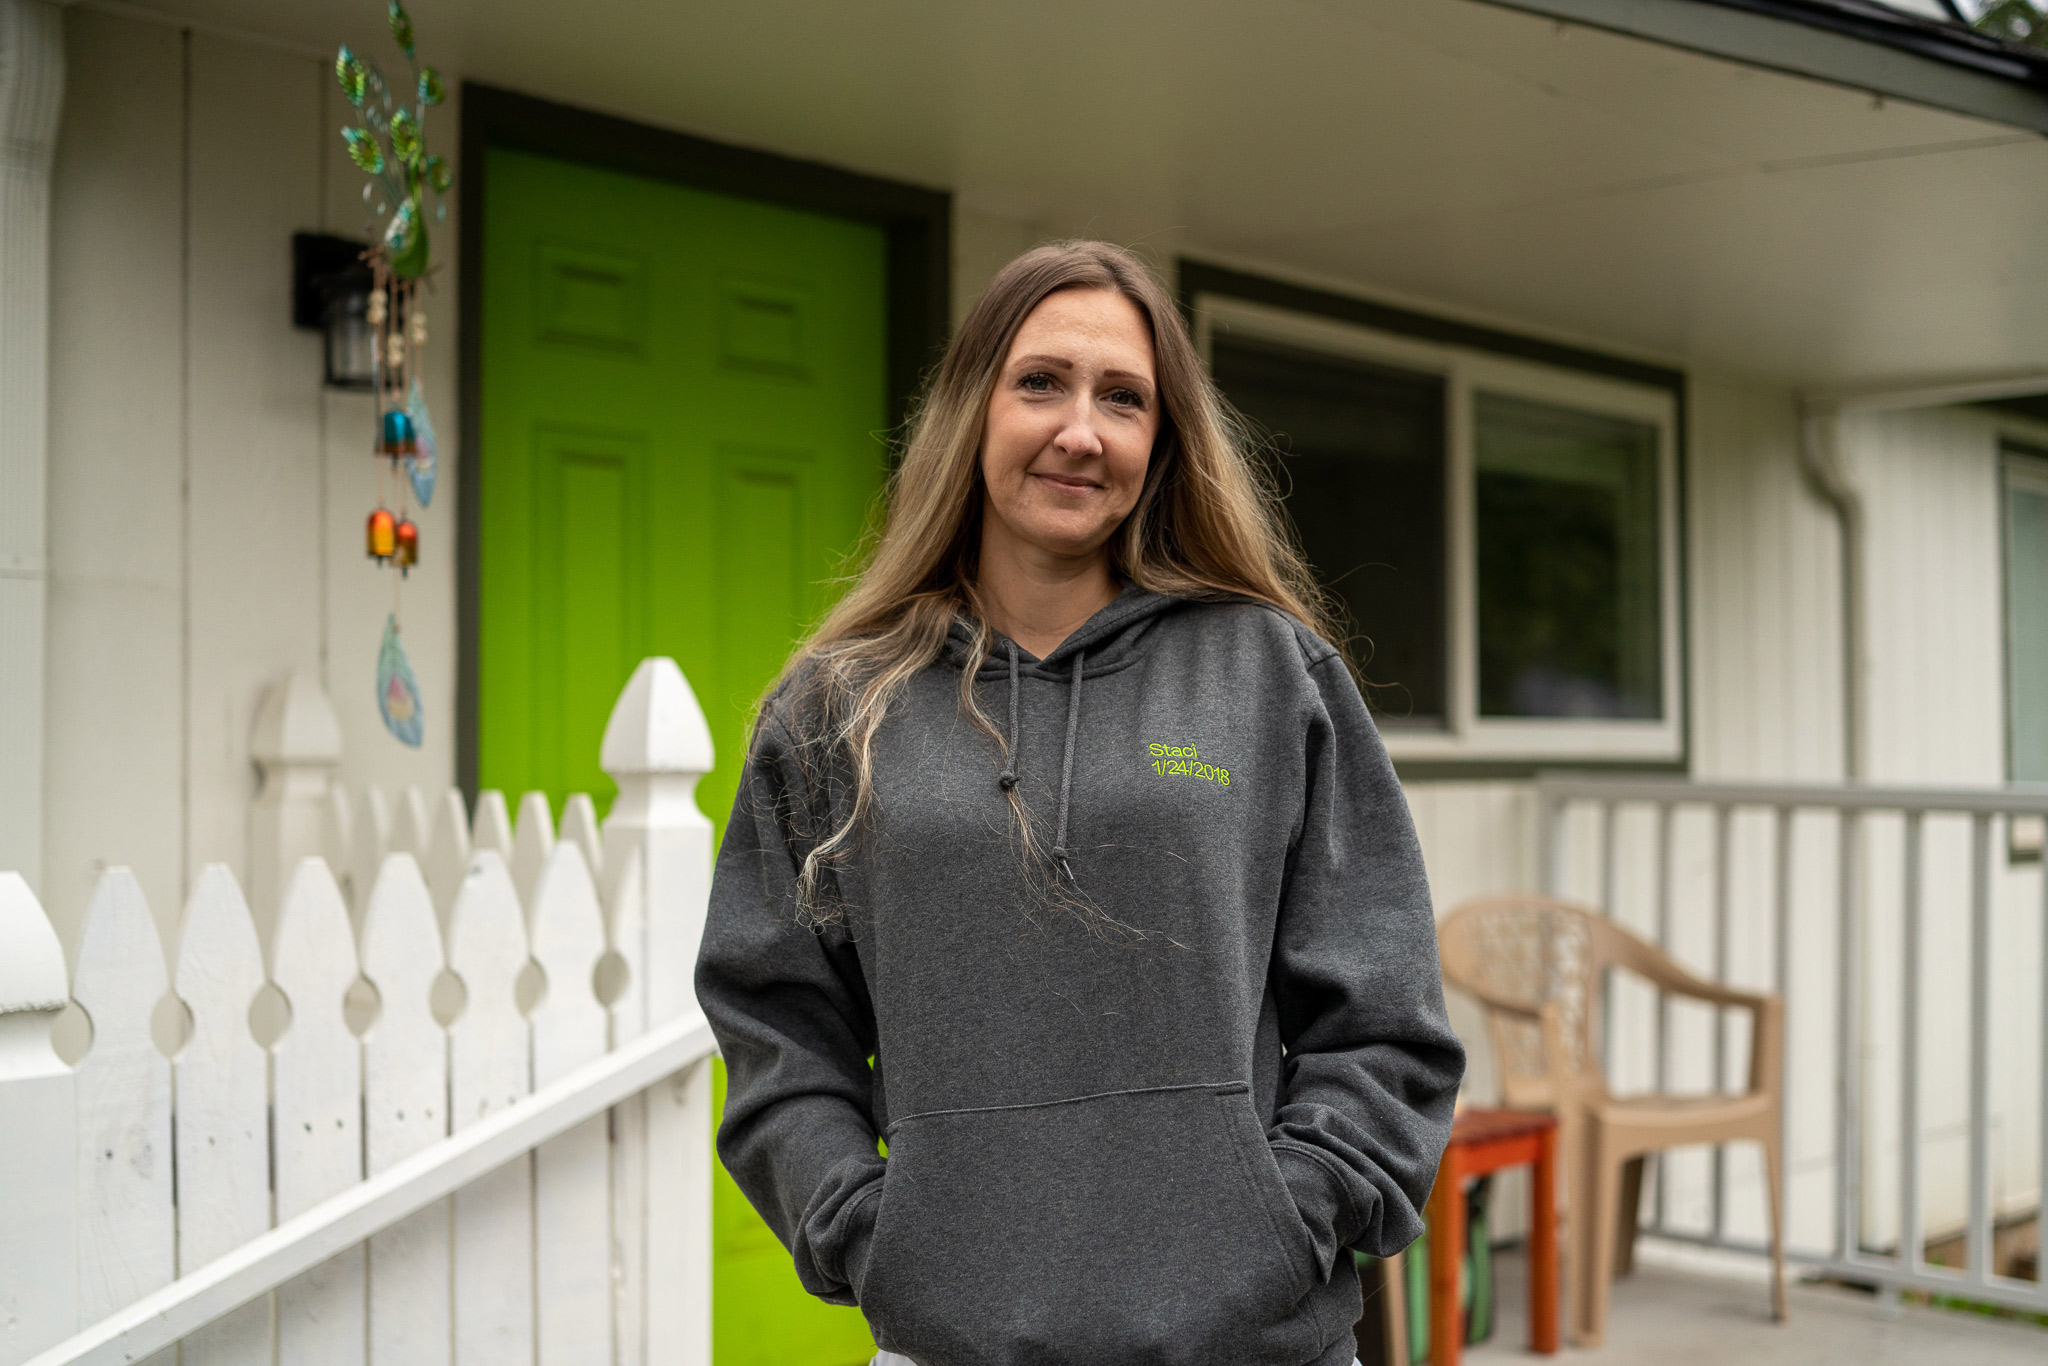 a woman smiles at the camera as she stands on a porch in front of a white house with a lime green door